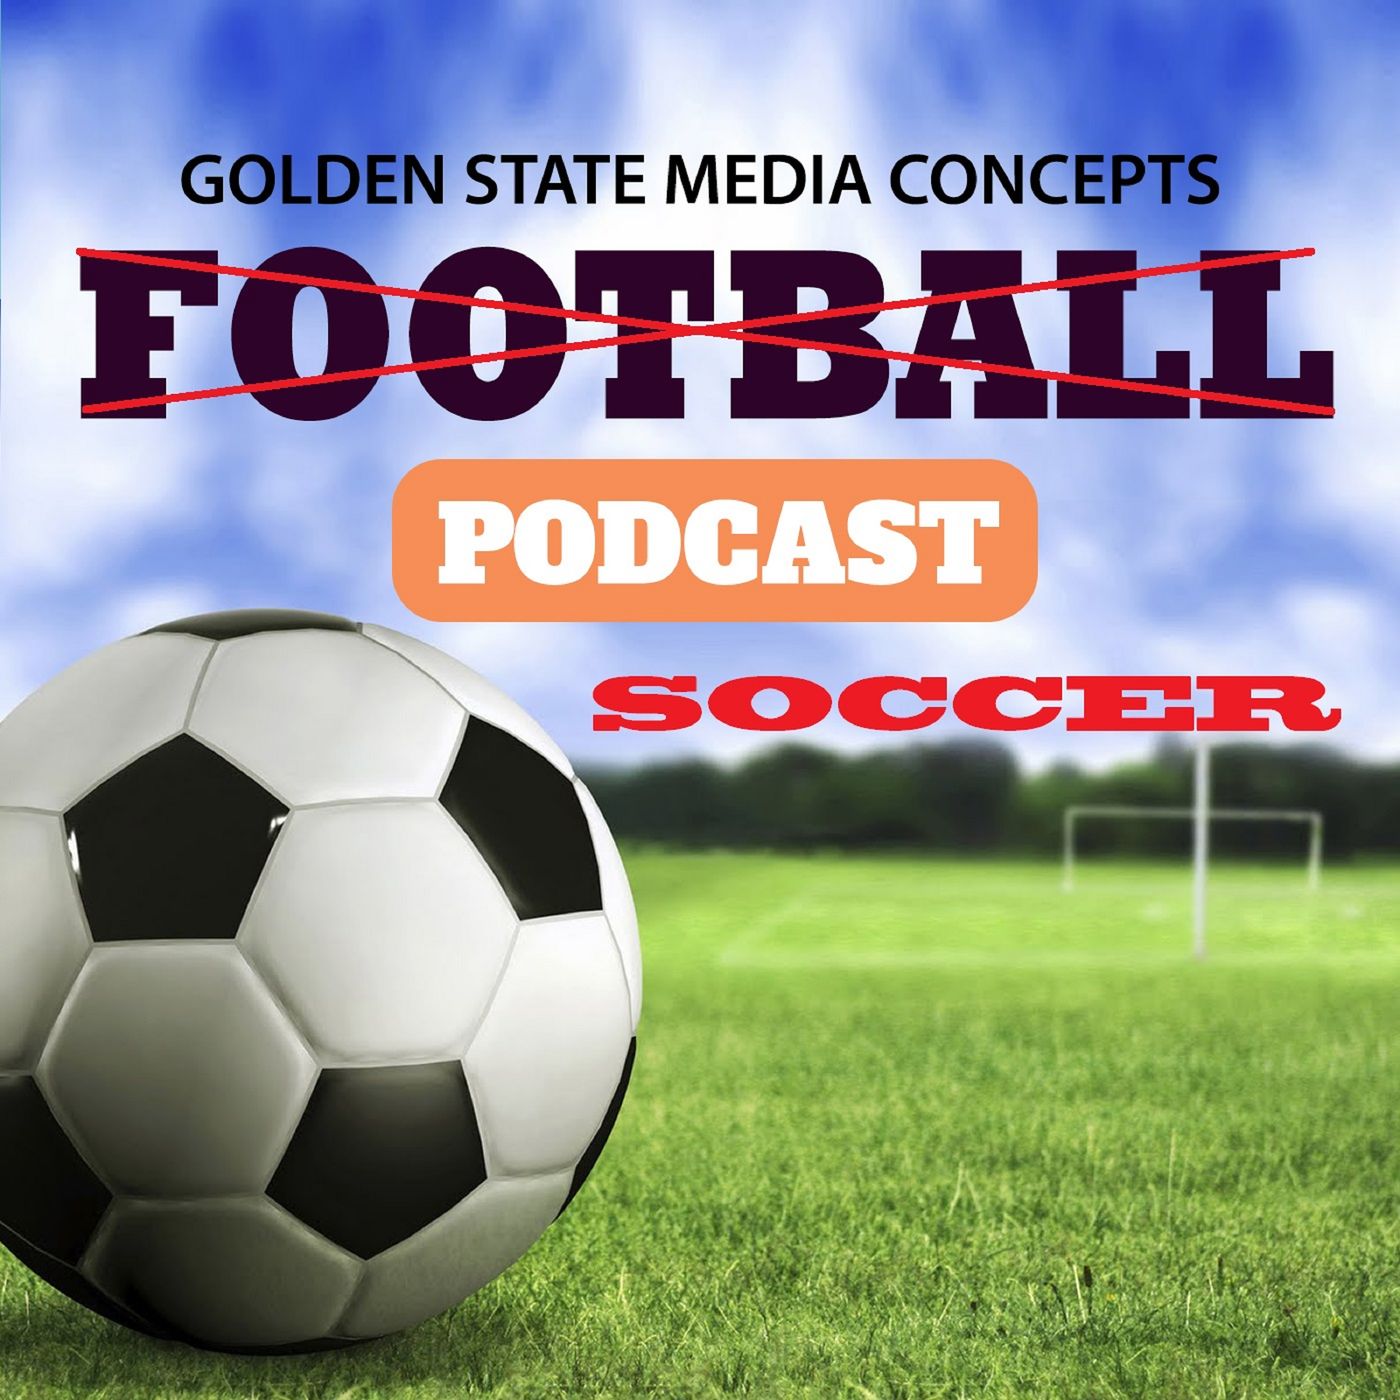 LIVE: Maresca's Chelsea Challenge, UCL Final Drama, USMNT Copa America Goals, and More | The GSMC Soccer Podcast by GSMC Sports